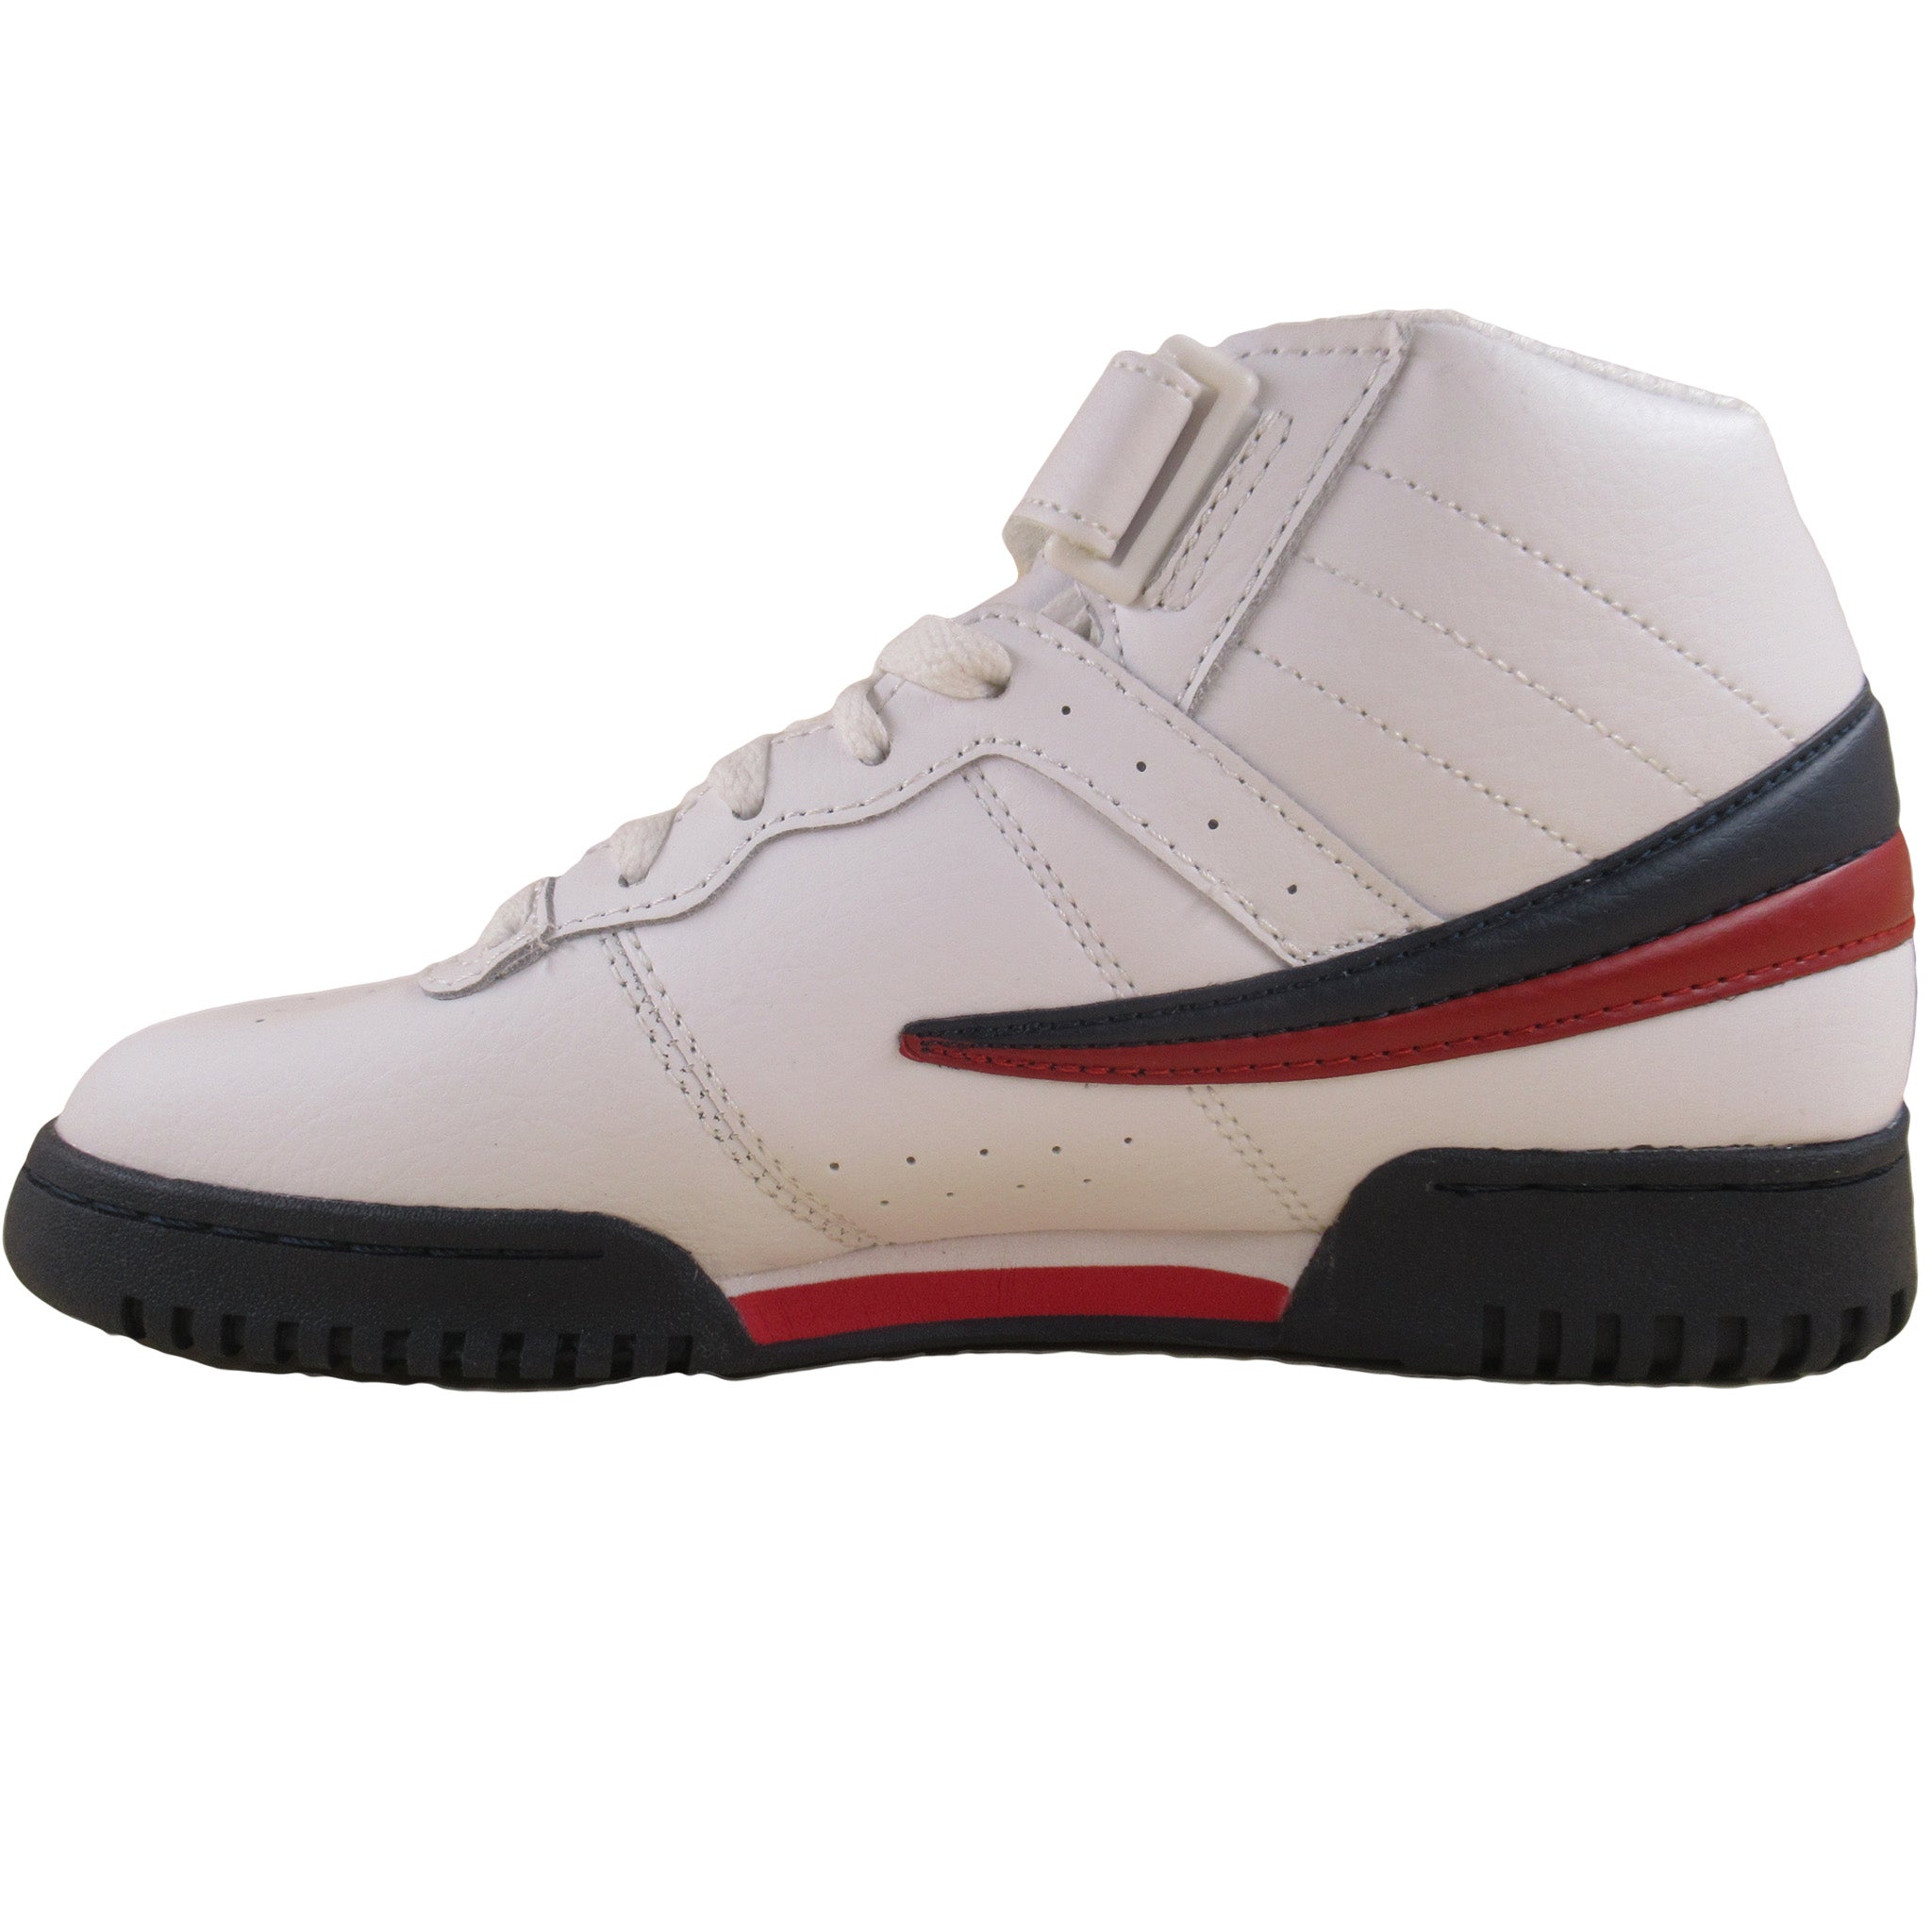 Athletic Fila and That White Shoe – Navy Shoes Kids Casual Store F-13 Red More Grade-School